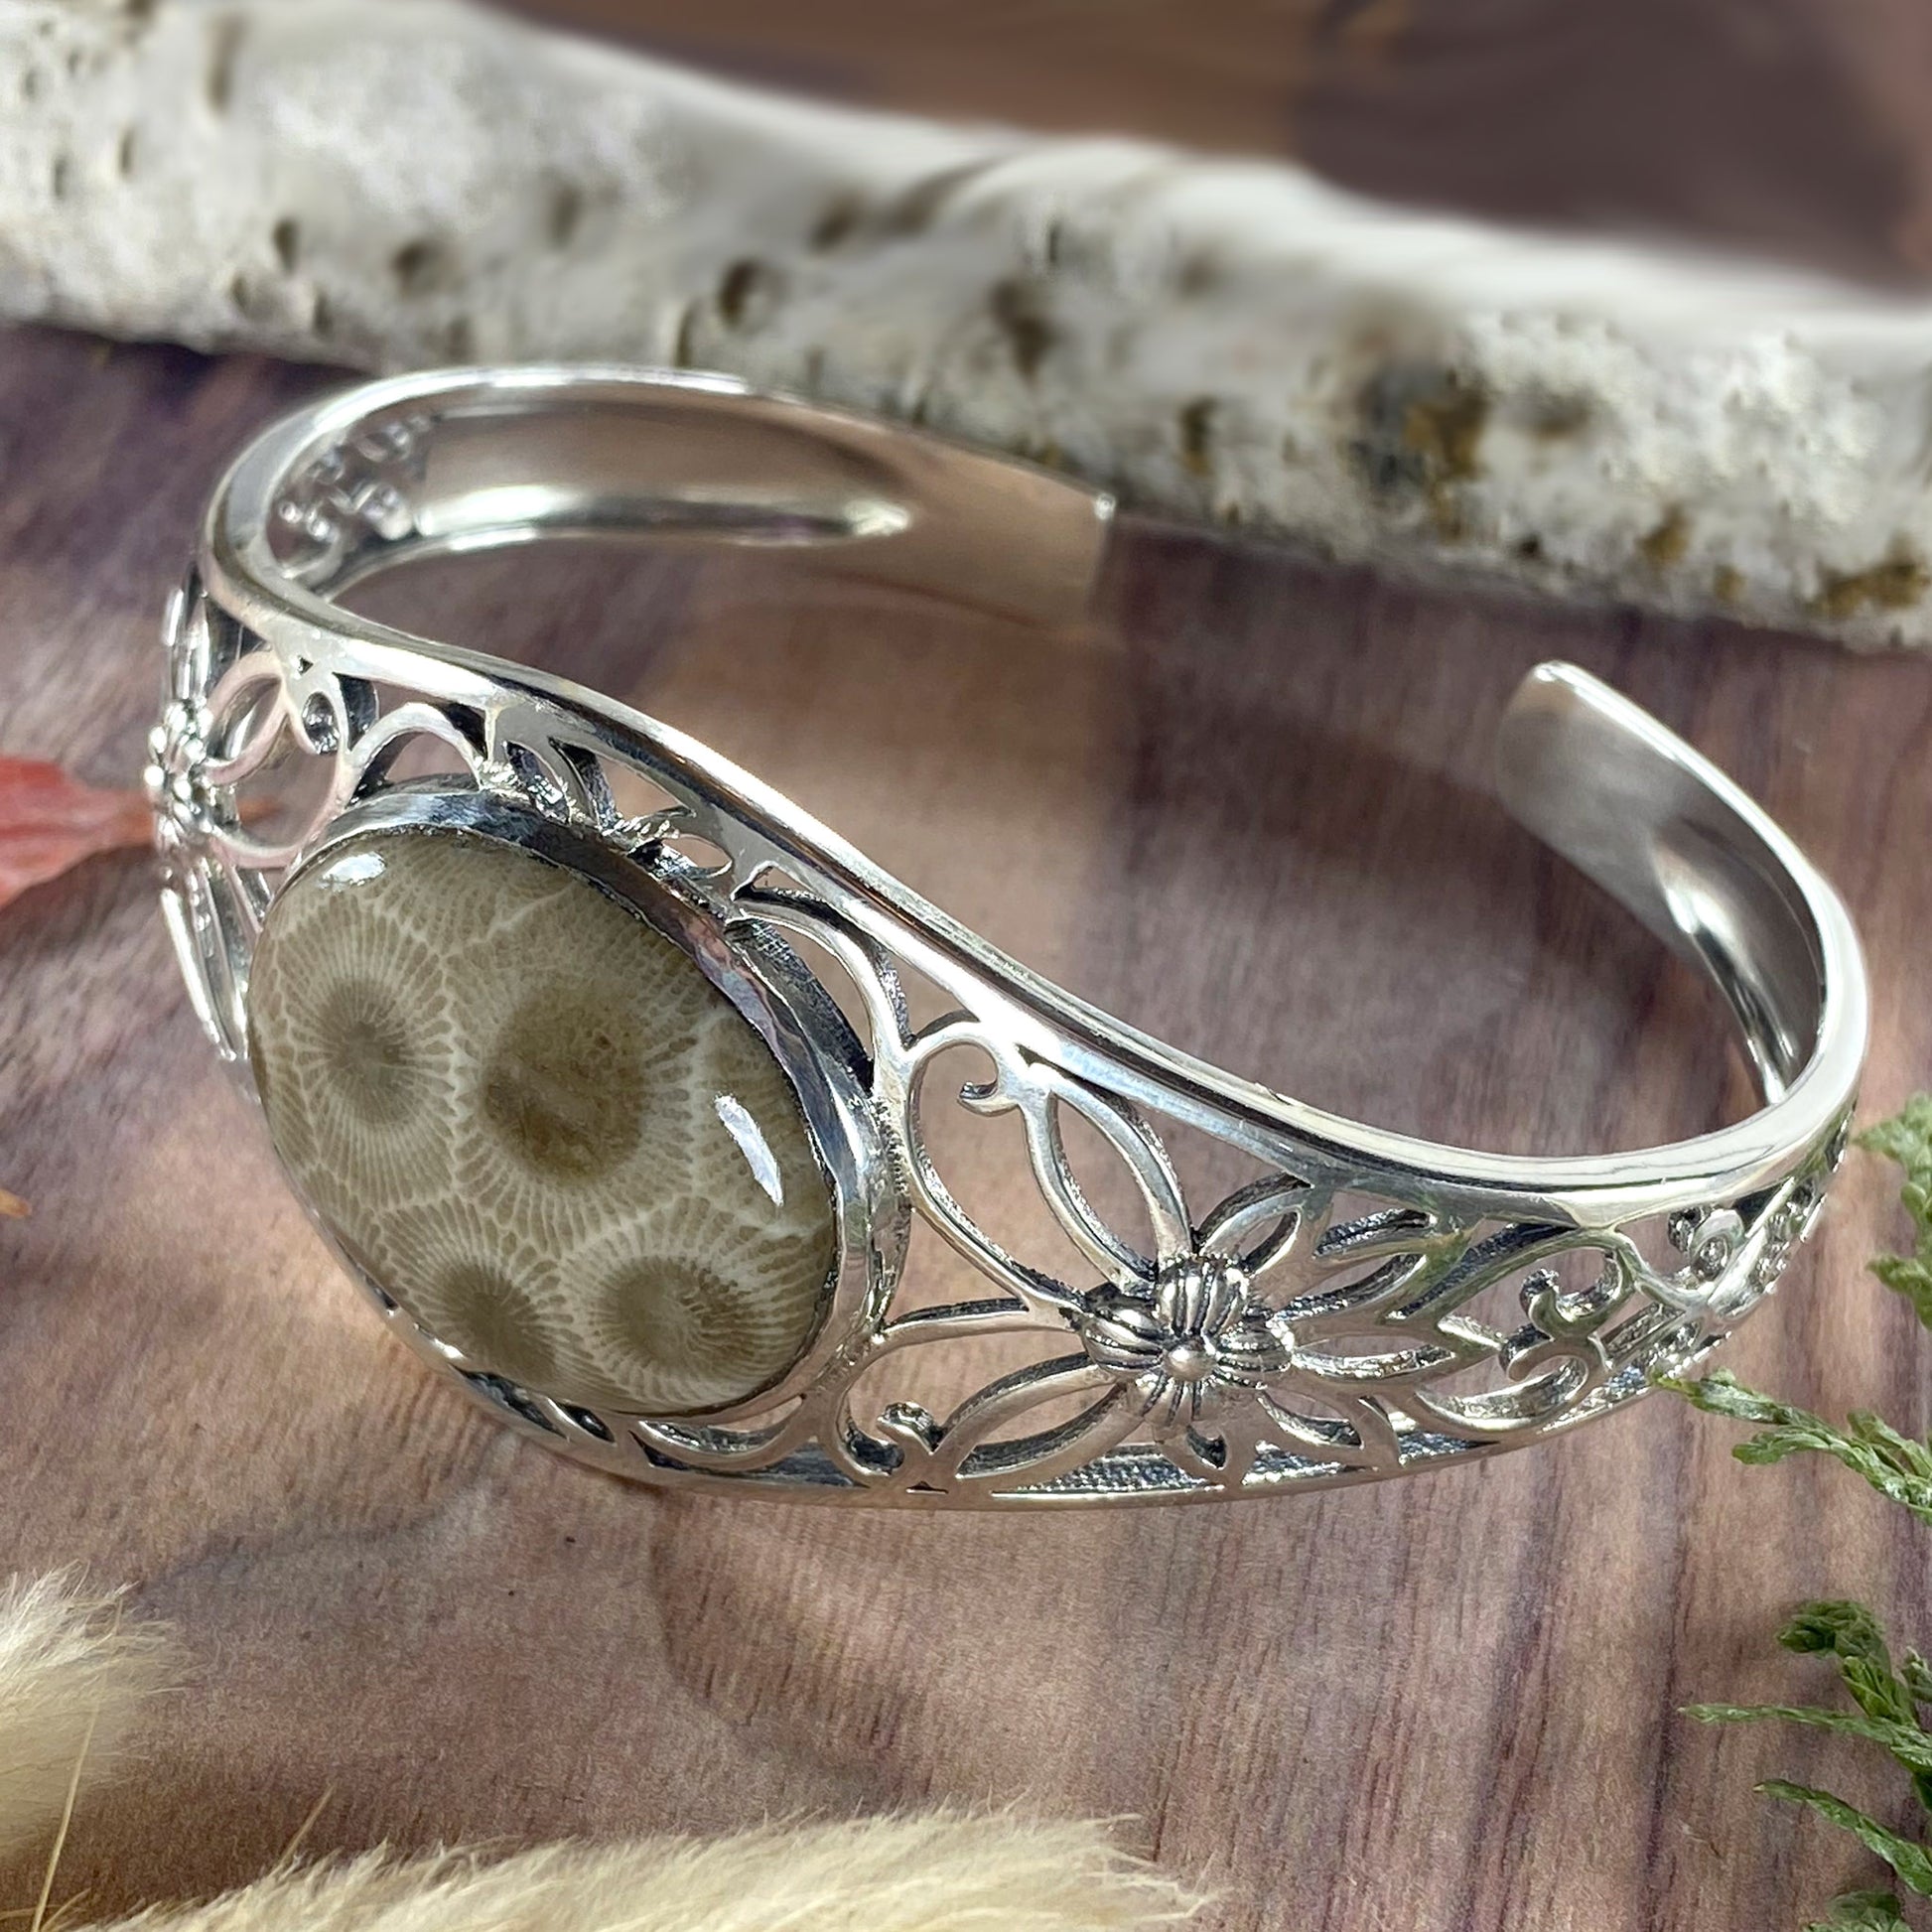 Petoskey Stone Cuff Bracelet Front View II - Stone Treasures by the Lake